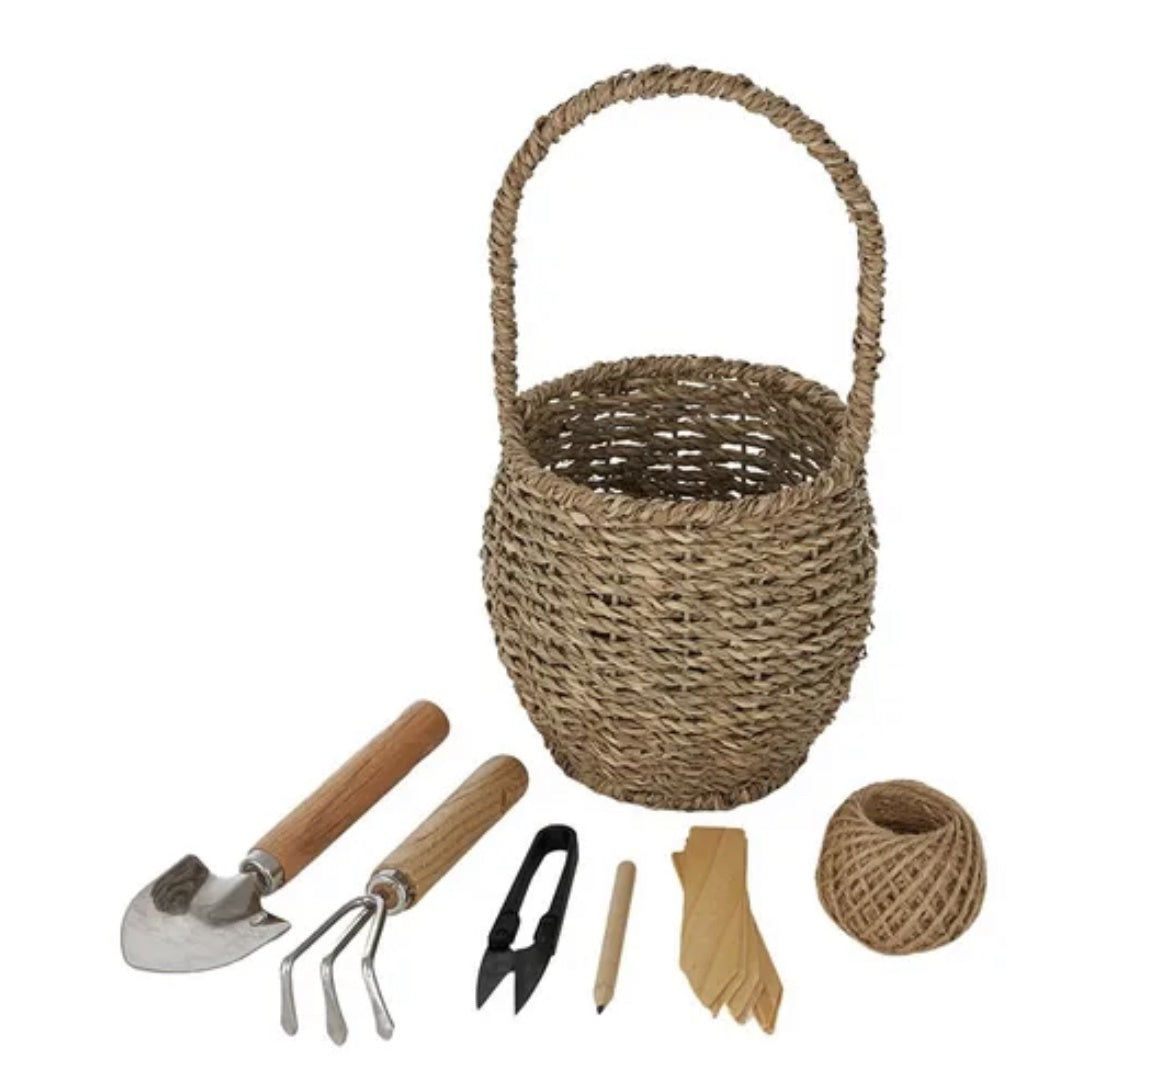 Peggy Garden Tools with Basket 7-piece set